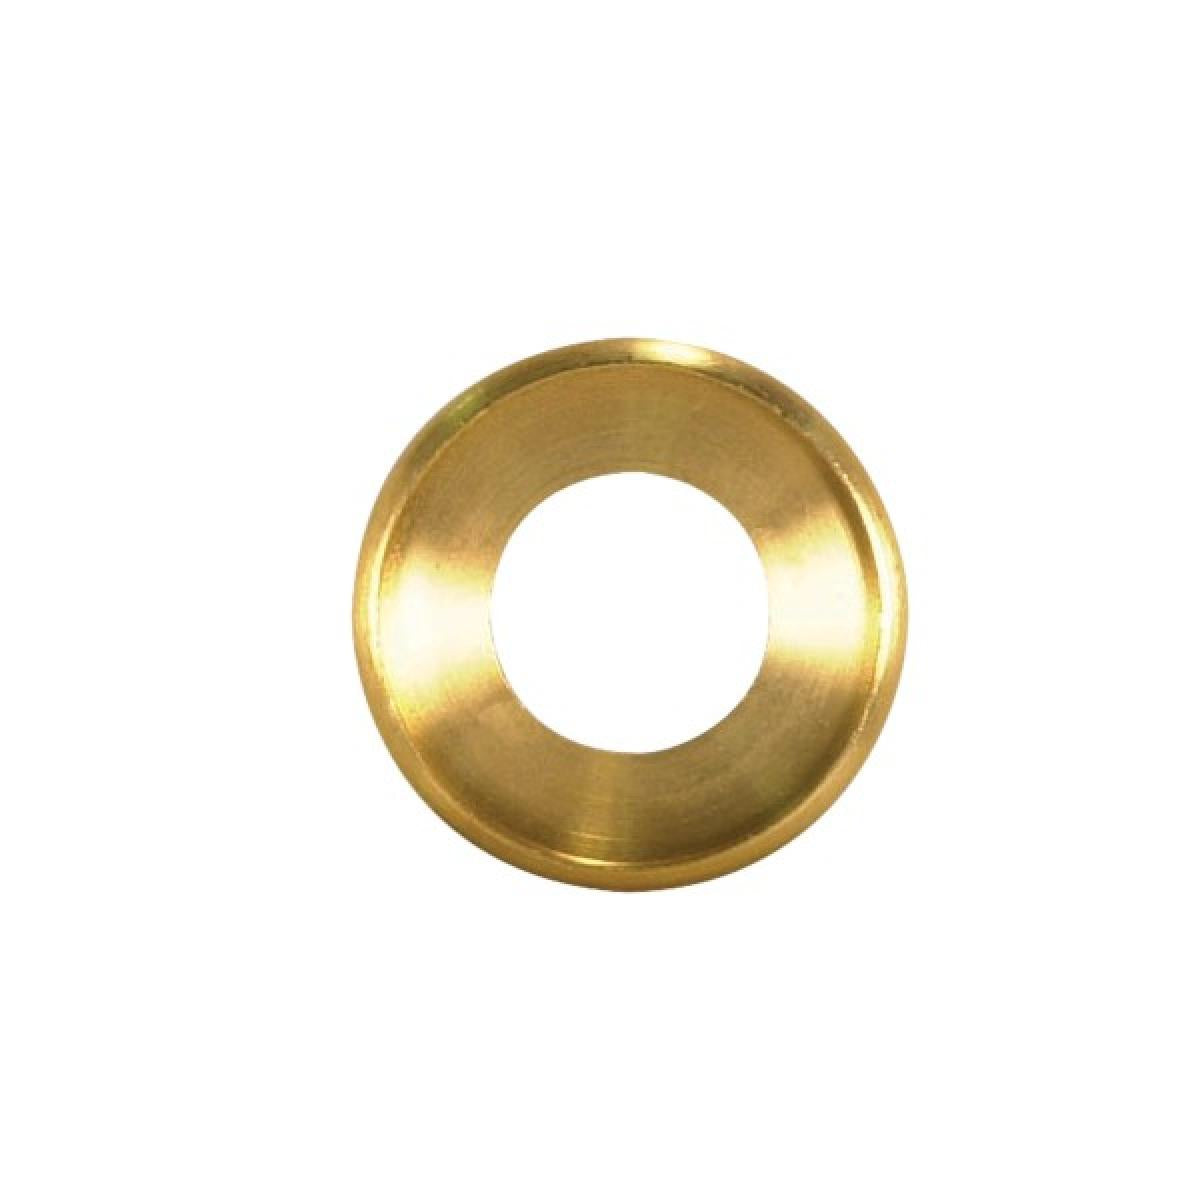 Satco 90-1614 Turned Brass Check Ring 1/4 IP Slip Unfinished 1-1/4" Diameter